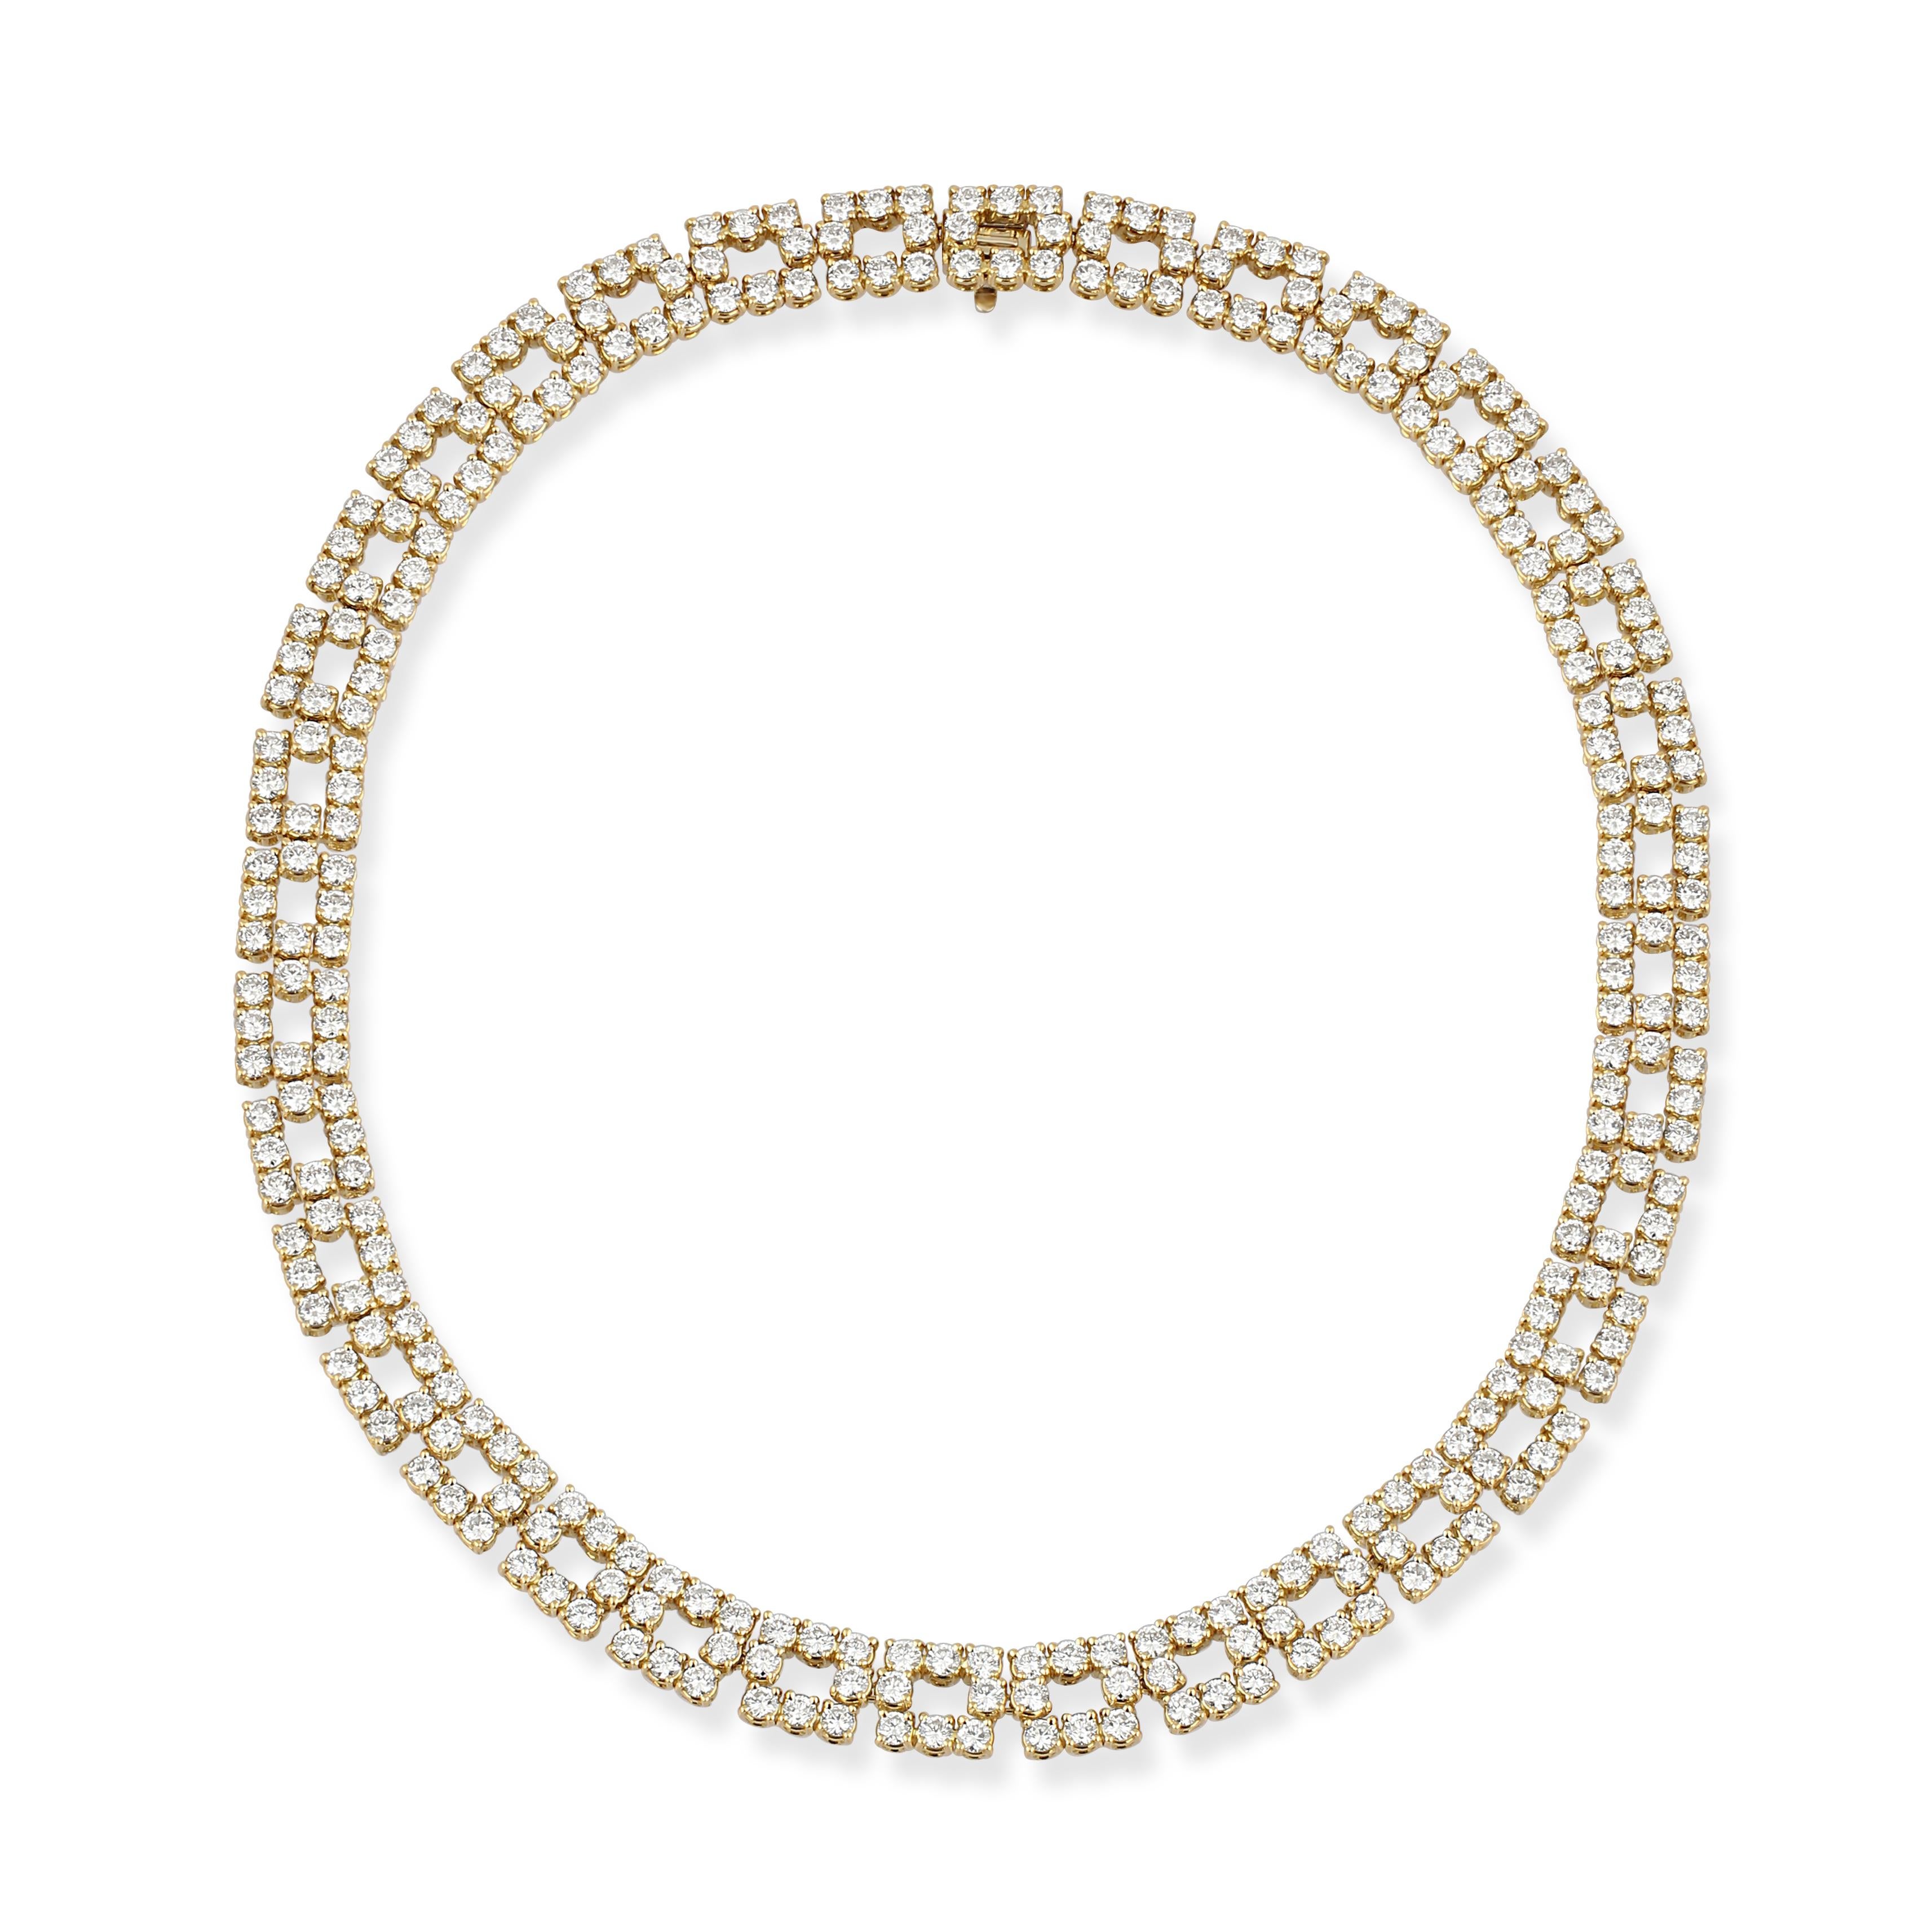 20ct Diamond Necklace in 18k Yellow Gold In Good Condition For Sale In London, GB